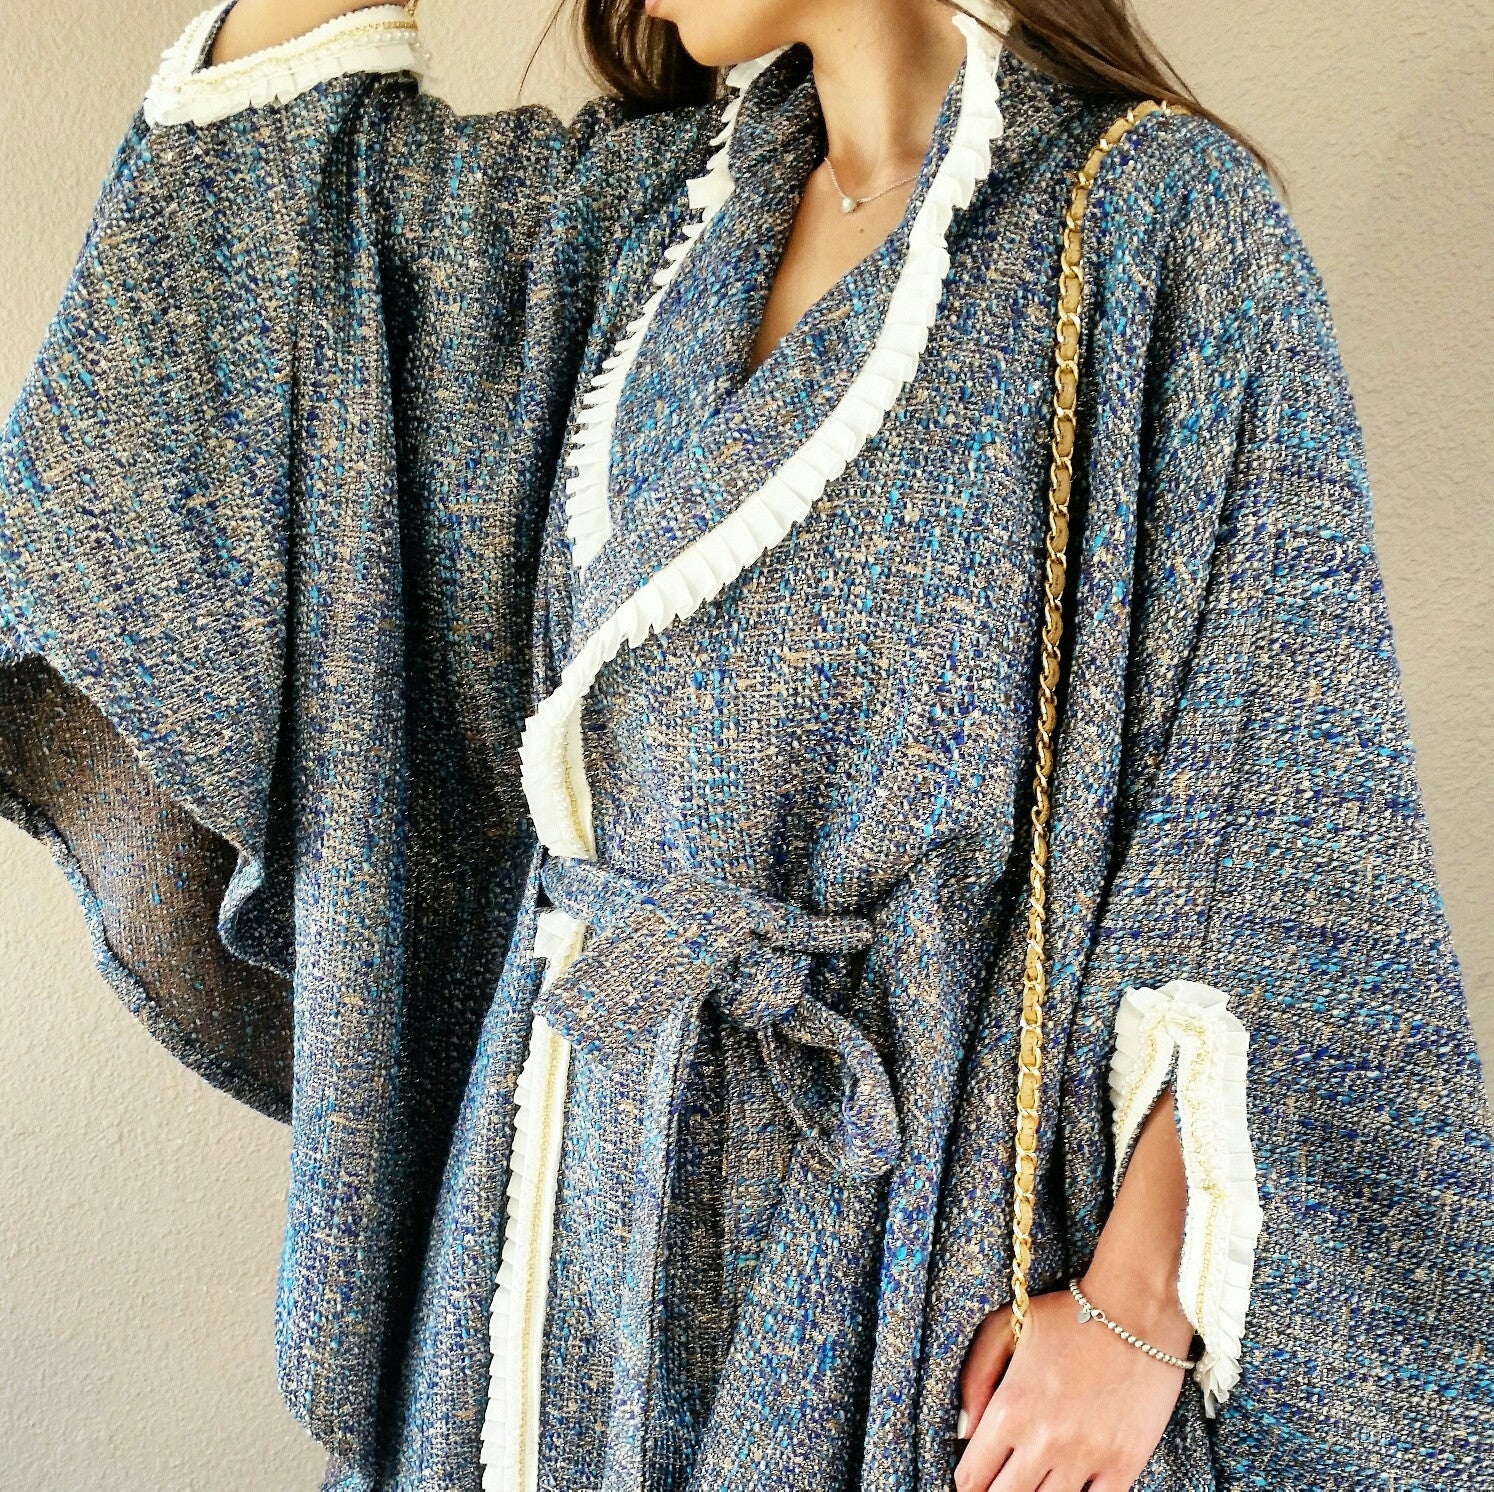 Textured Boucle Wool Cape in Shades of Blue